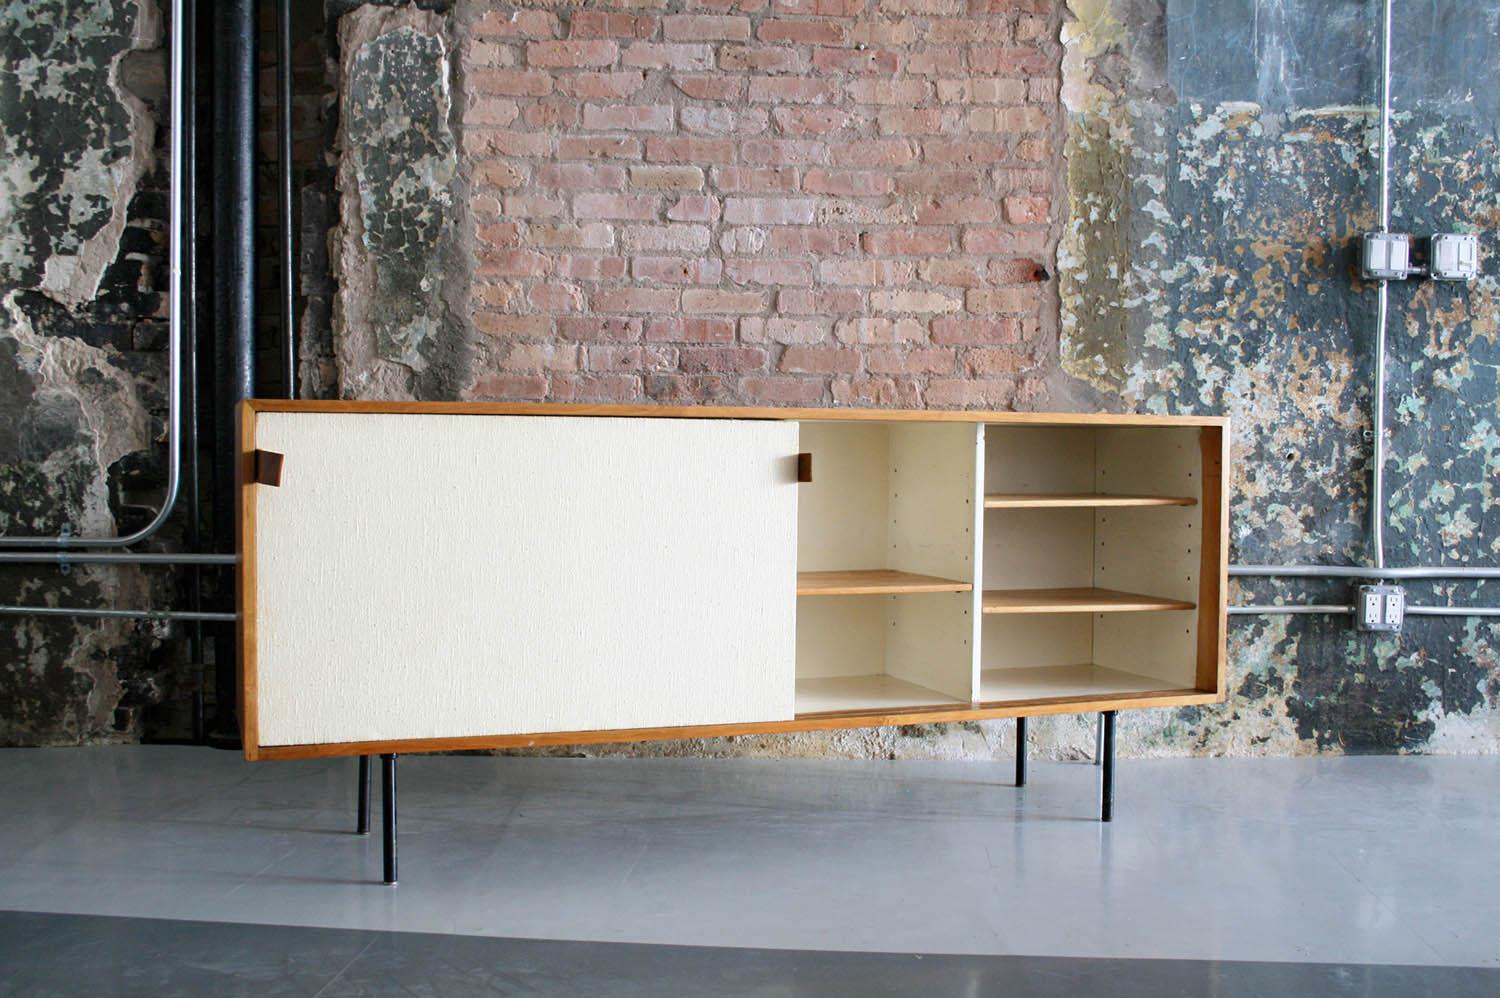 This credenza designed by Florence Knoll, features handsome original fabric covered sliding doors with leather pulls. Inside are five shelves and one sliding drawer. The bleached walnut case sits on a steel base. No maker's mark is visible on this